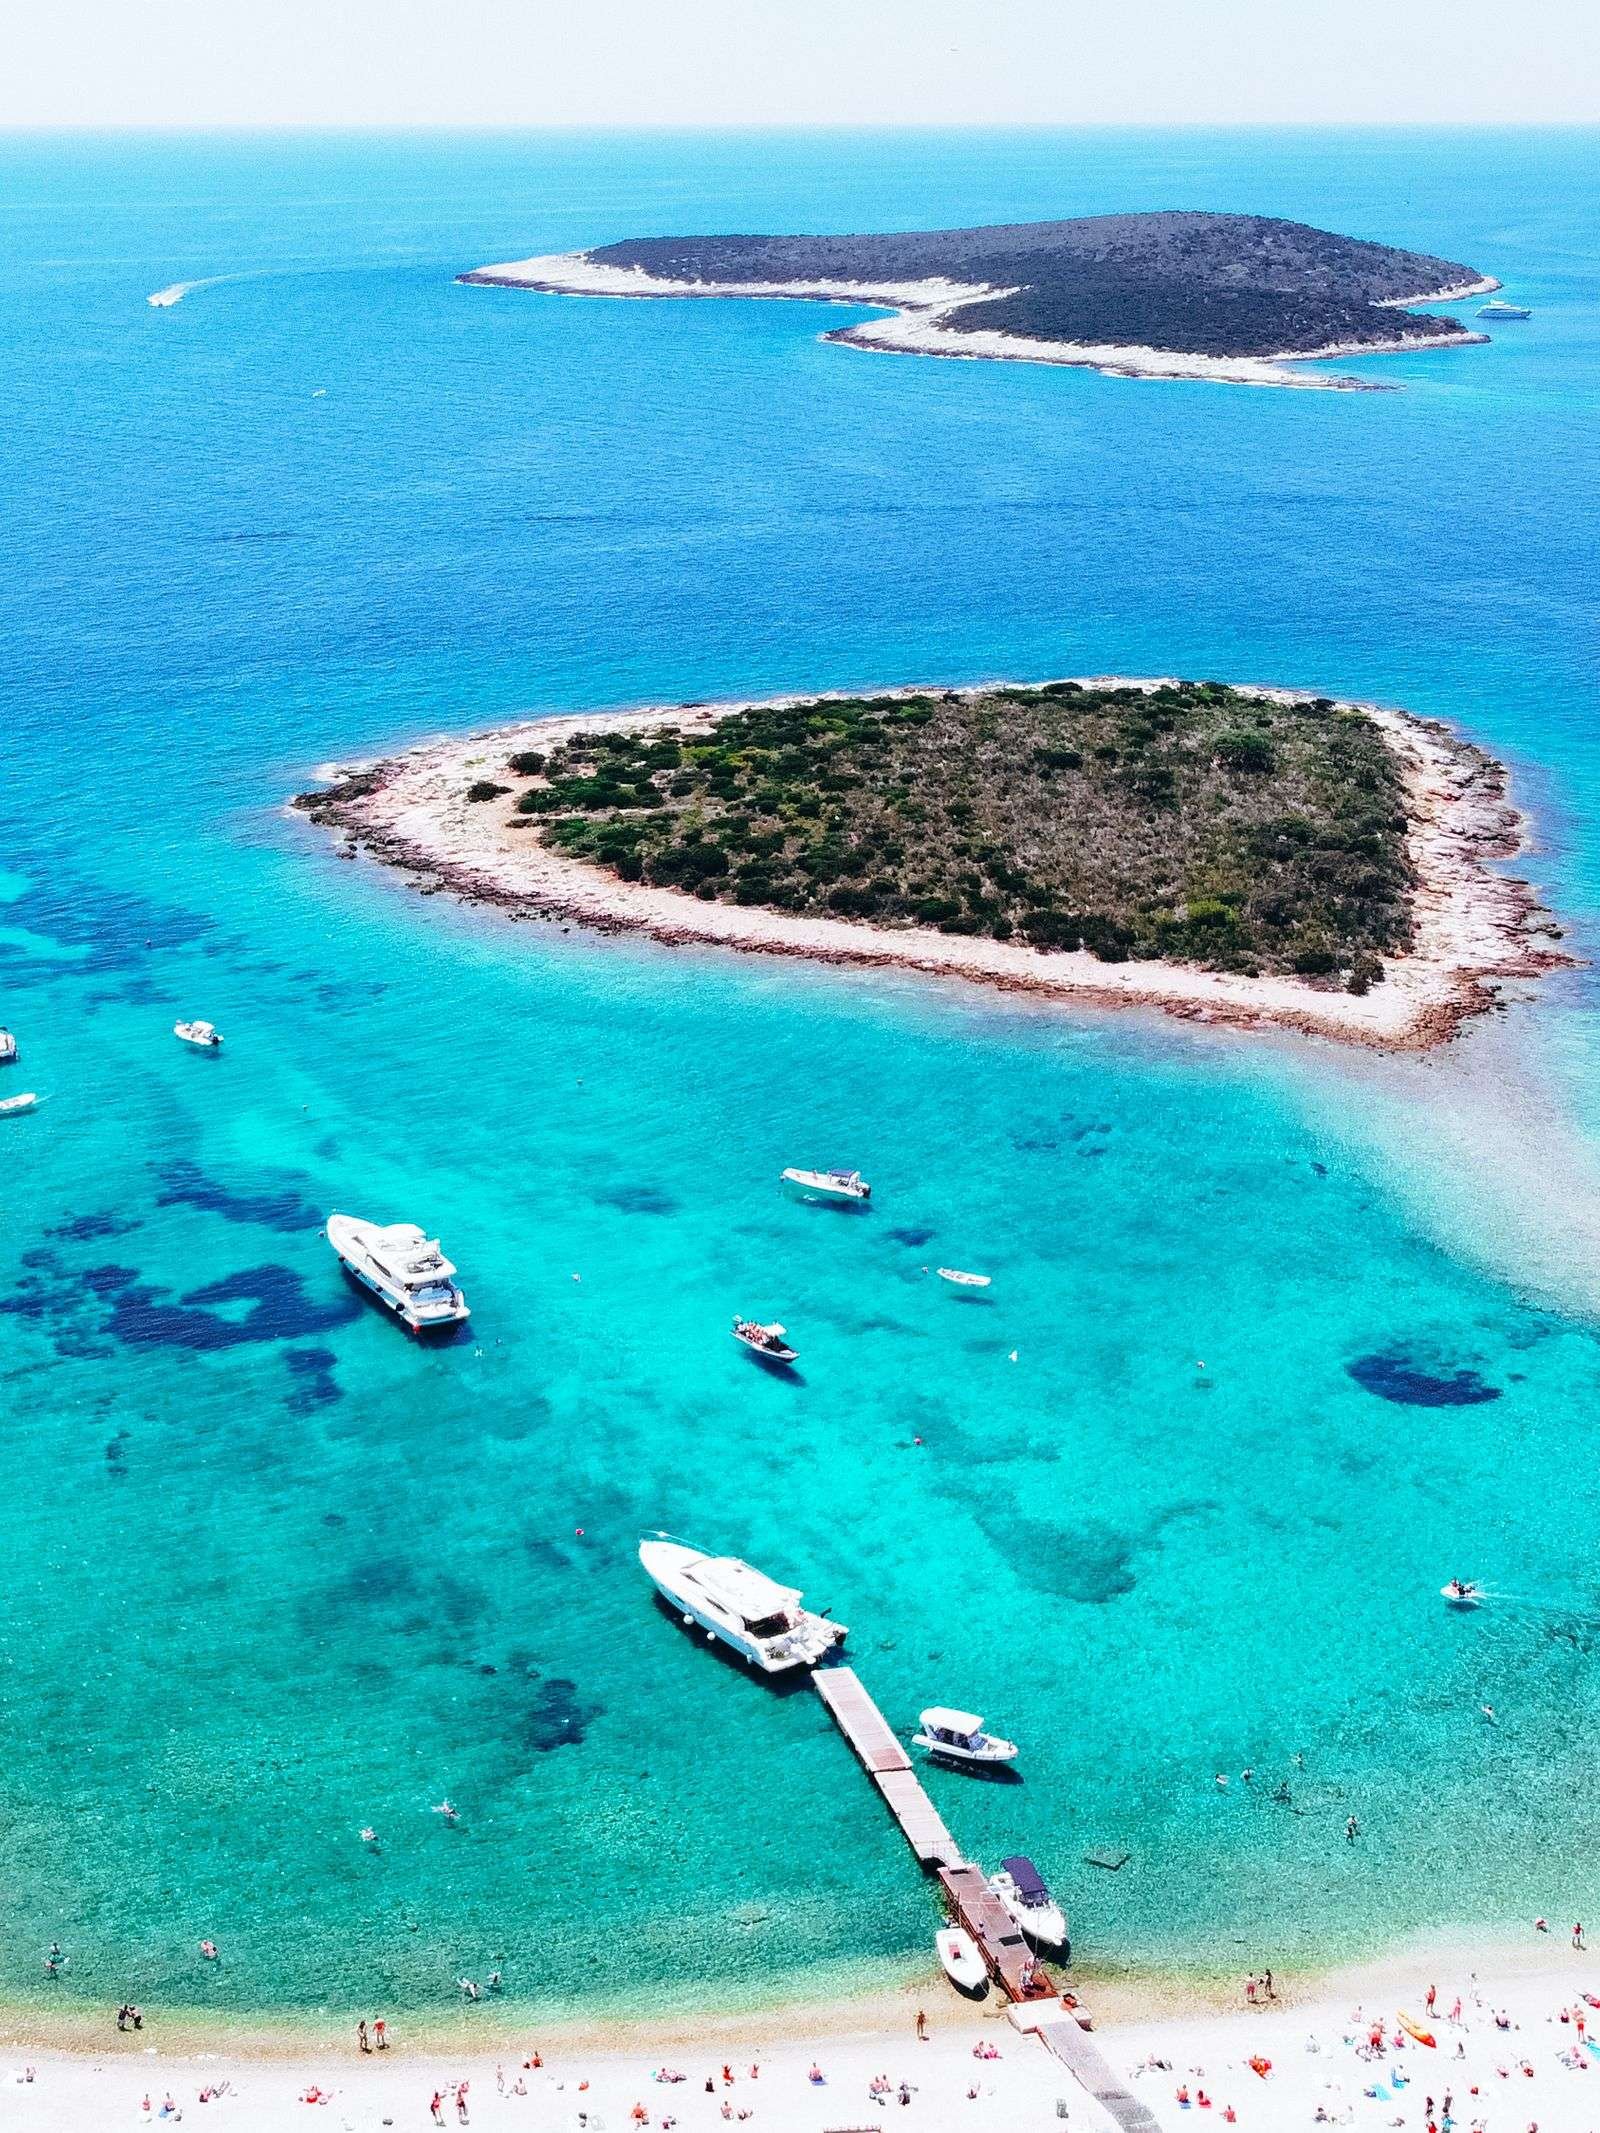 an aerial photo of a vivid blue lagoon with a heart shaped island covered in trees and small white boats in the turquoise water